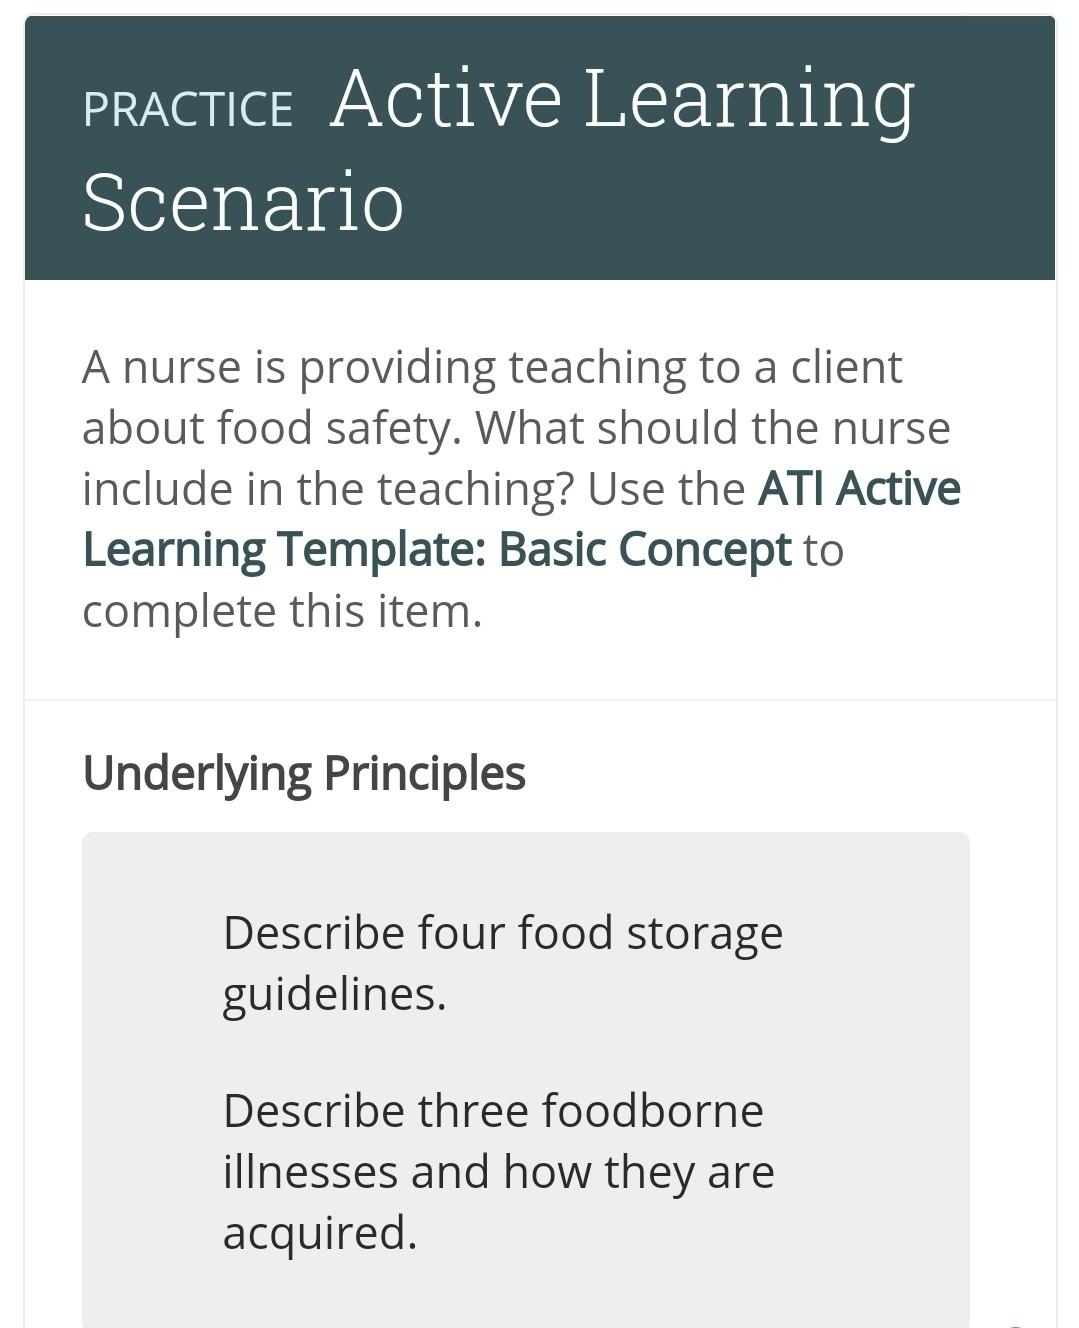 Practice Active Learning Scenario A Nurse Is Providing Teaching To A Client About Food Safety What Should The Nurse Inc 1